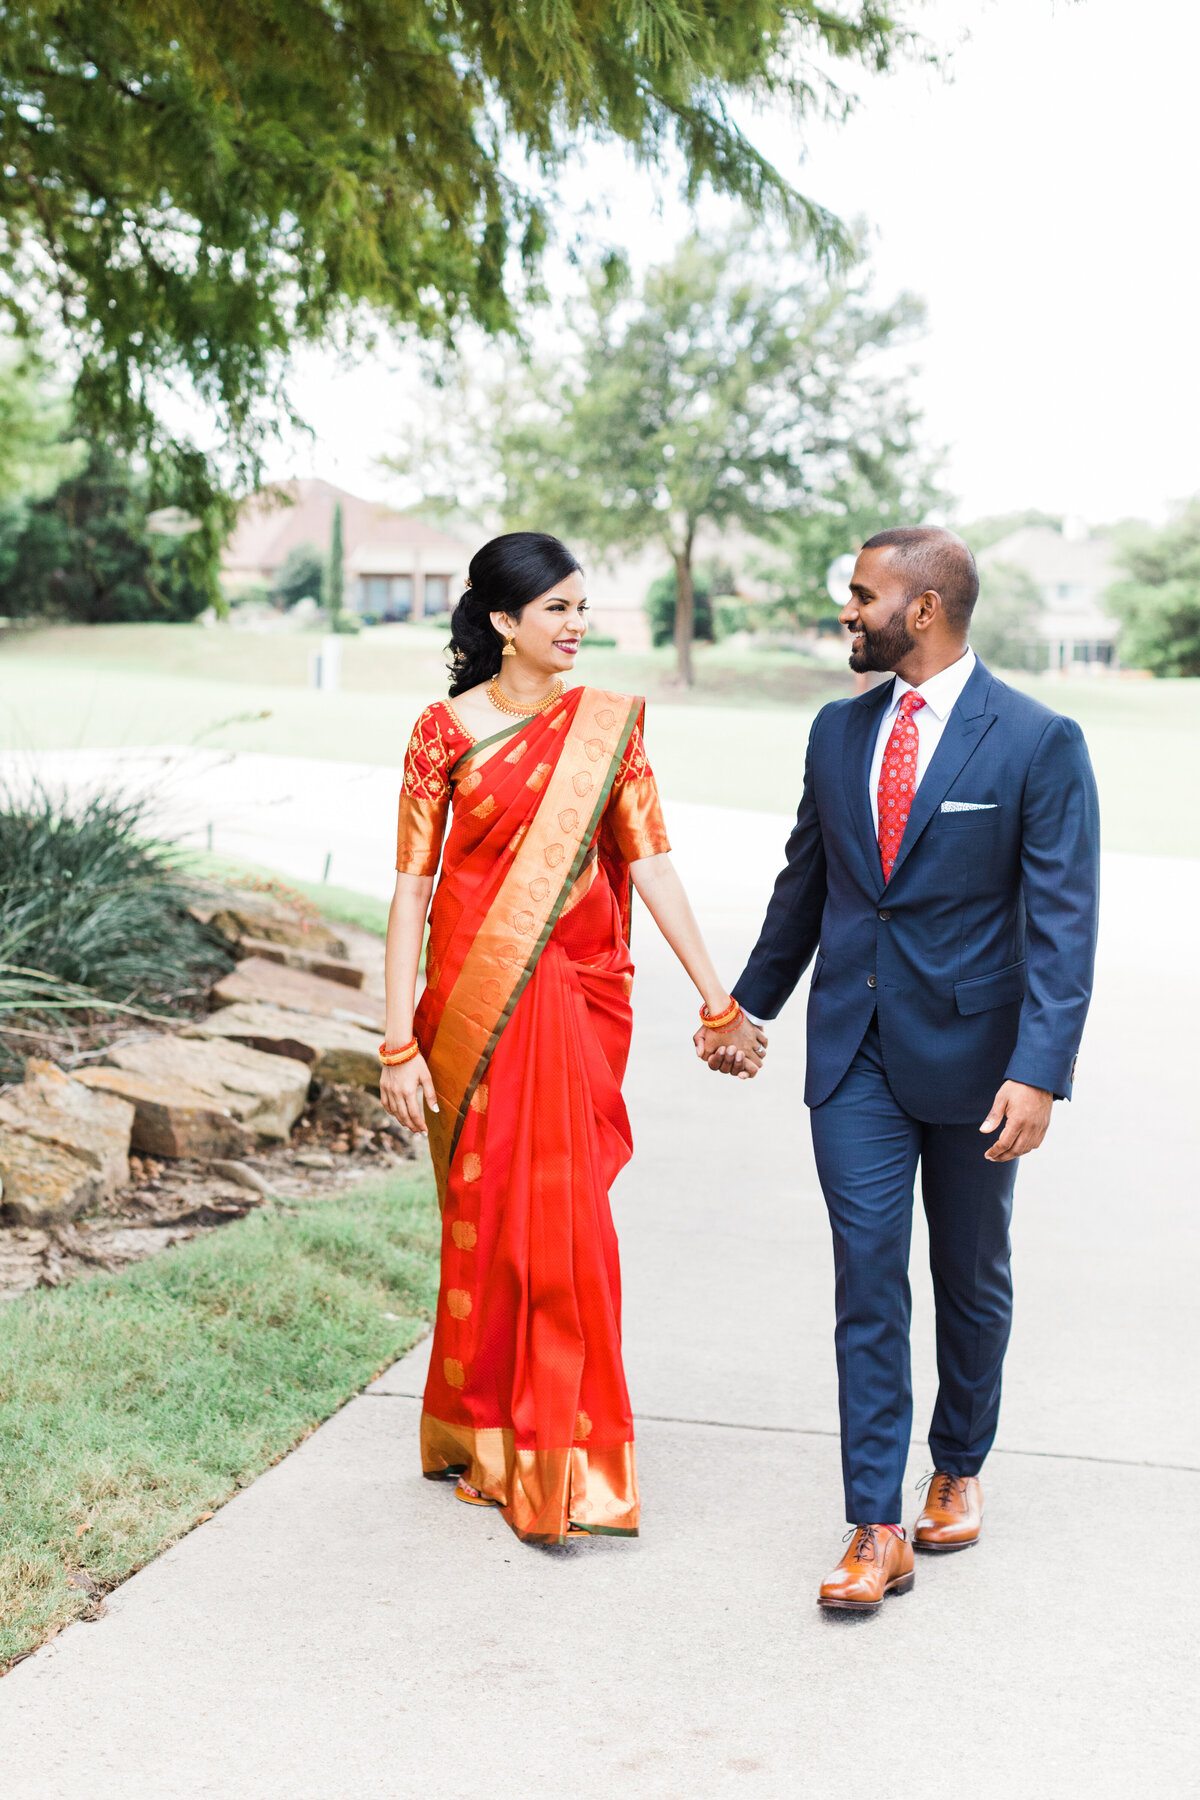 An Indian couple holding hands and looking into each other's eyes while walking down the road during their engagement photoshoot in DFW, Texas. The woman on the right is wearing traditional Indian attire while the man on the right is wearing a navy suit with a red tie and pocket square.